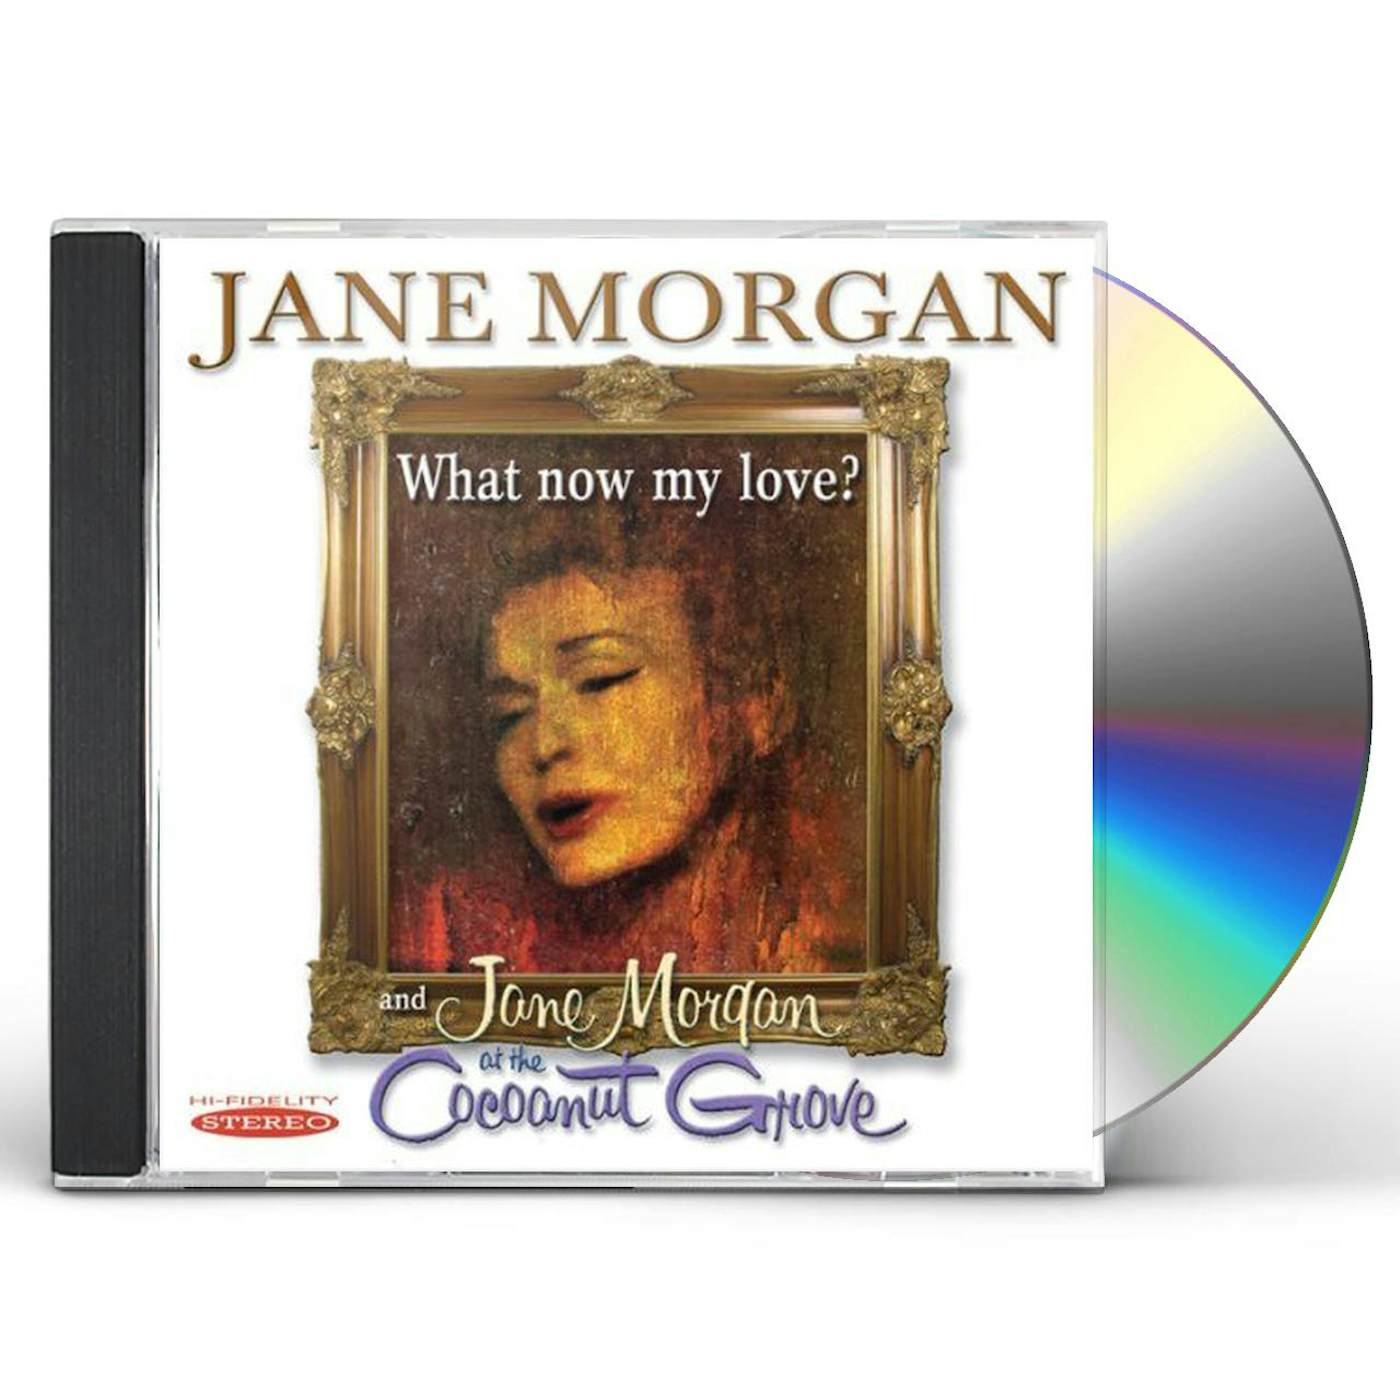 WHAT NOW MY LOVE & JANE MORGAN AT COCOANUT GROVE CD